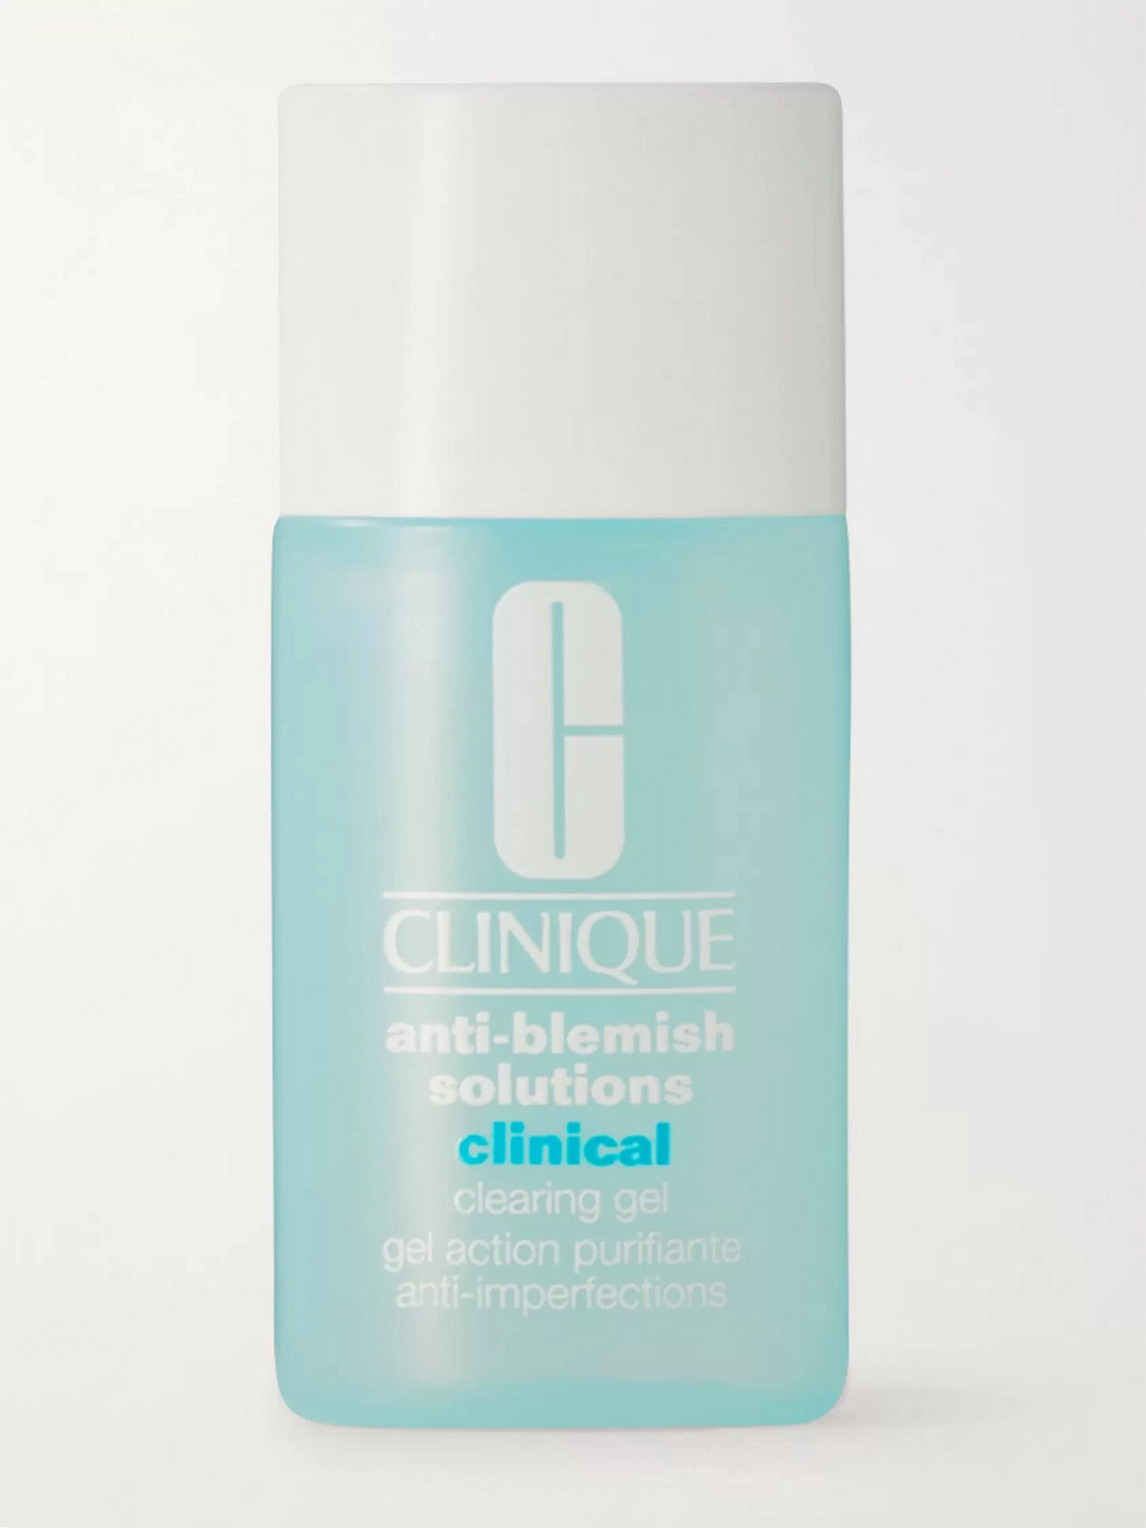 Clinique Anti-blemish Solutions Clinical Clearing Gel, 15ml In Colourless